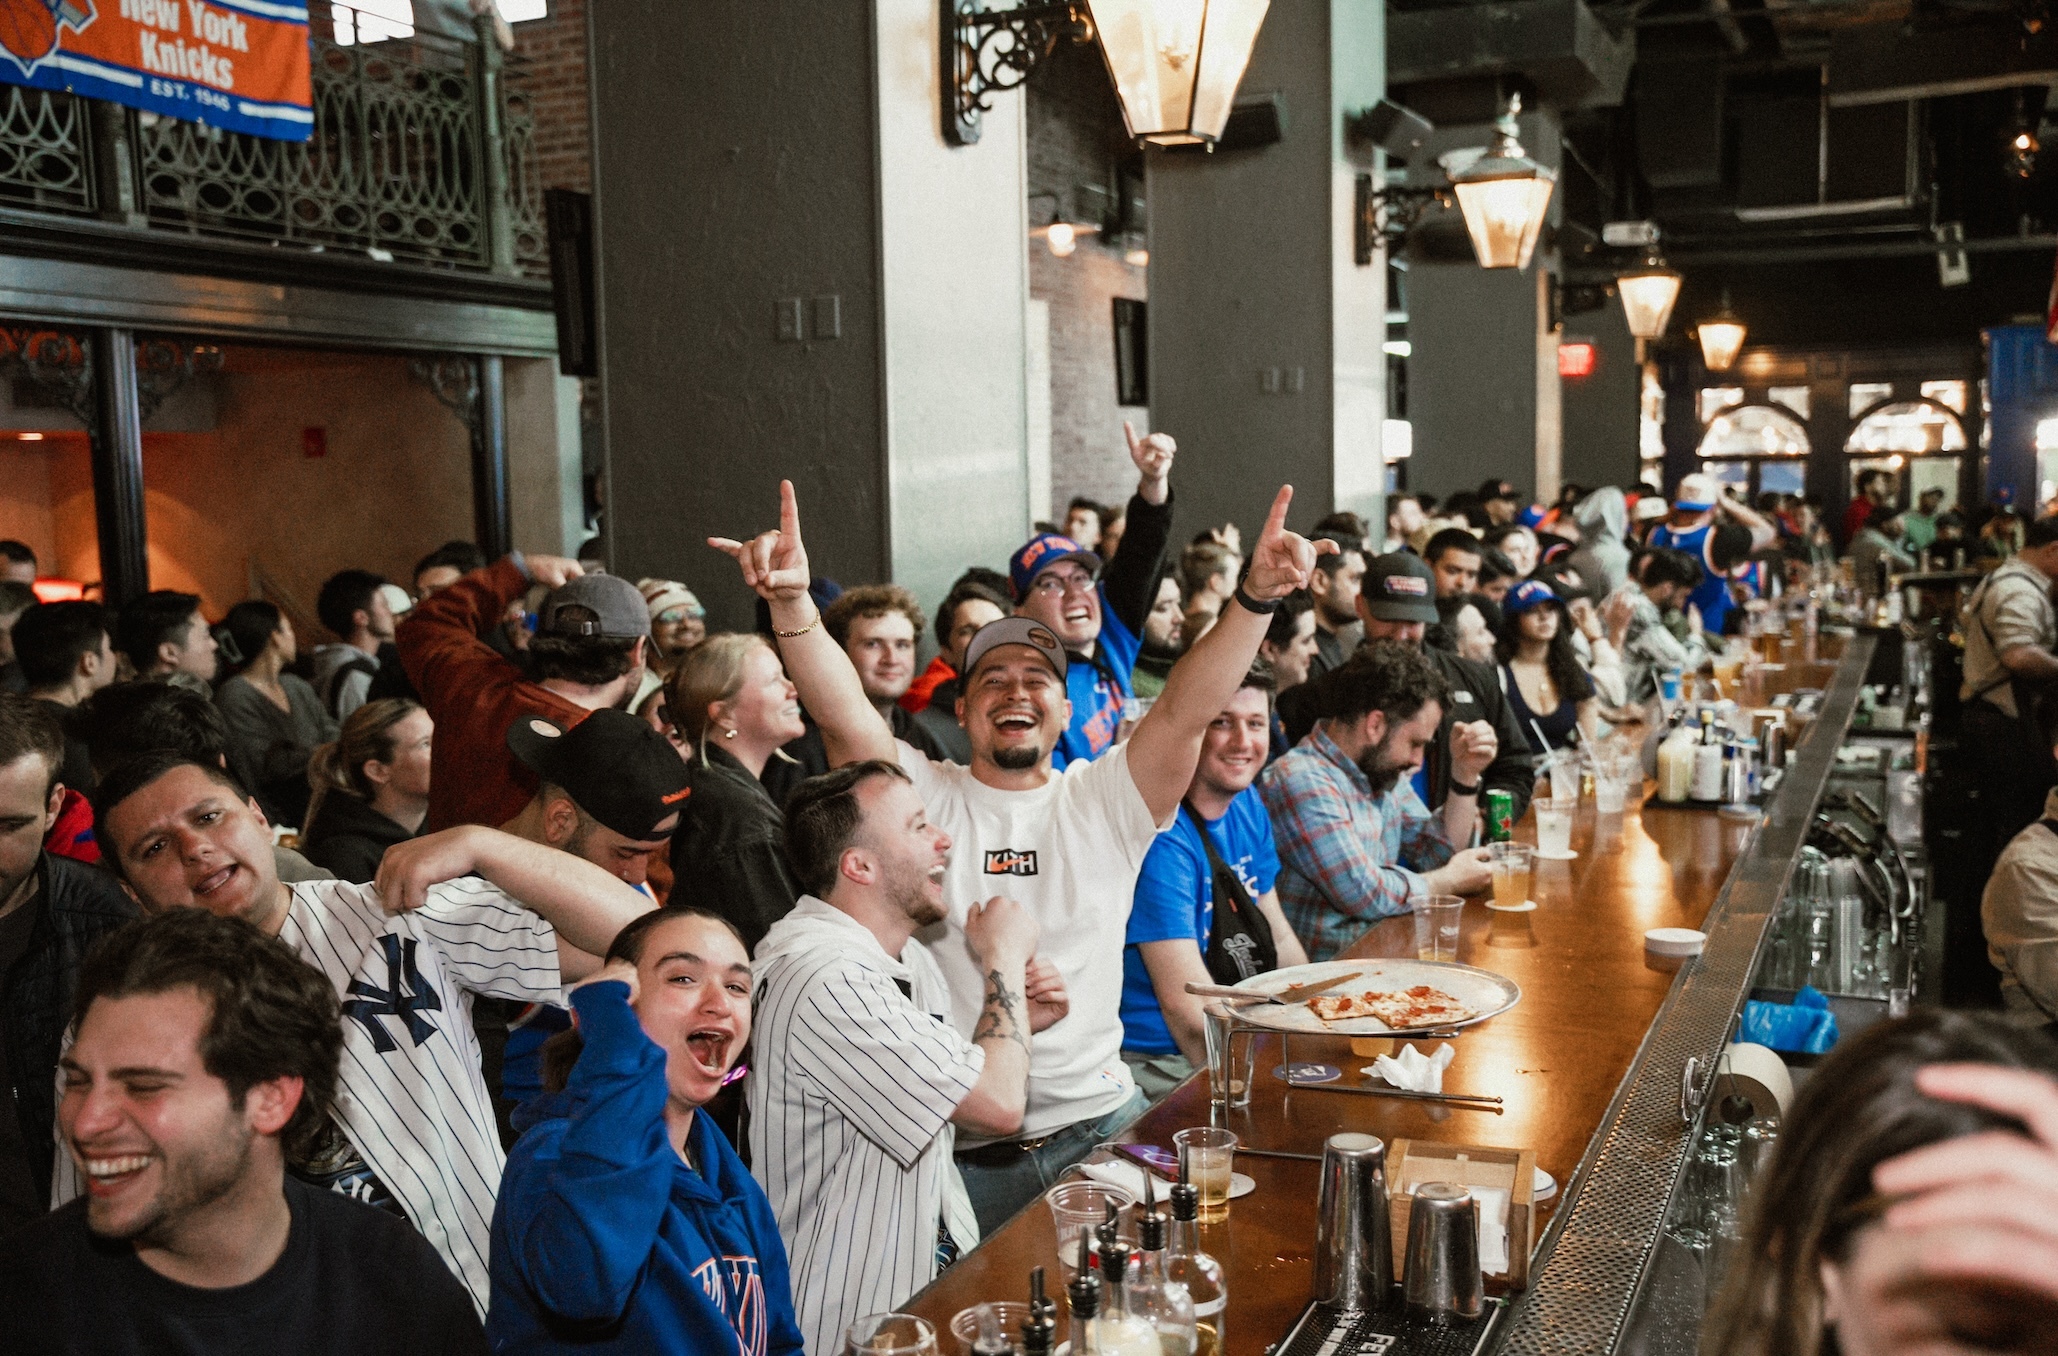 The best places to watch the Knicks game in NYC tomorrow night